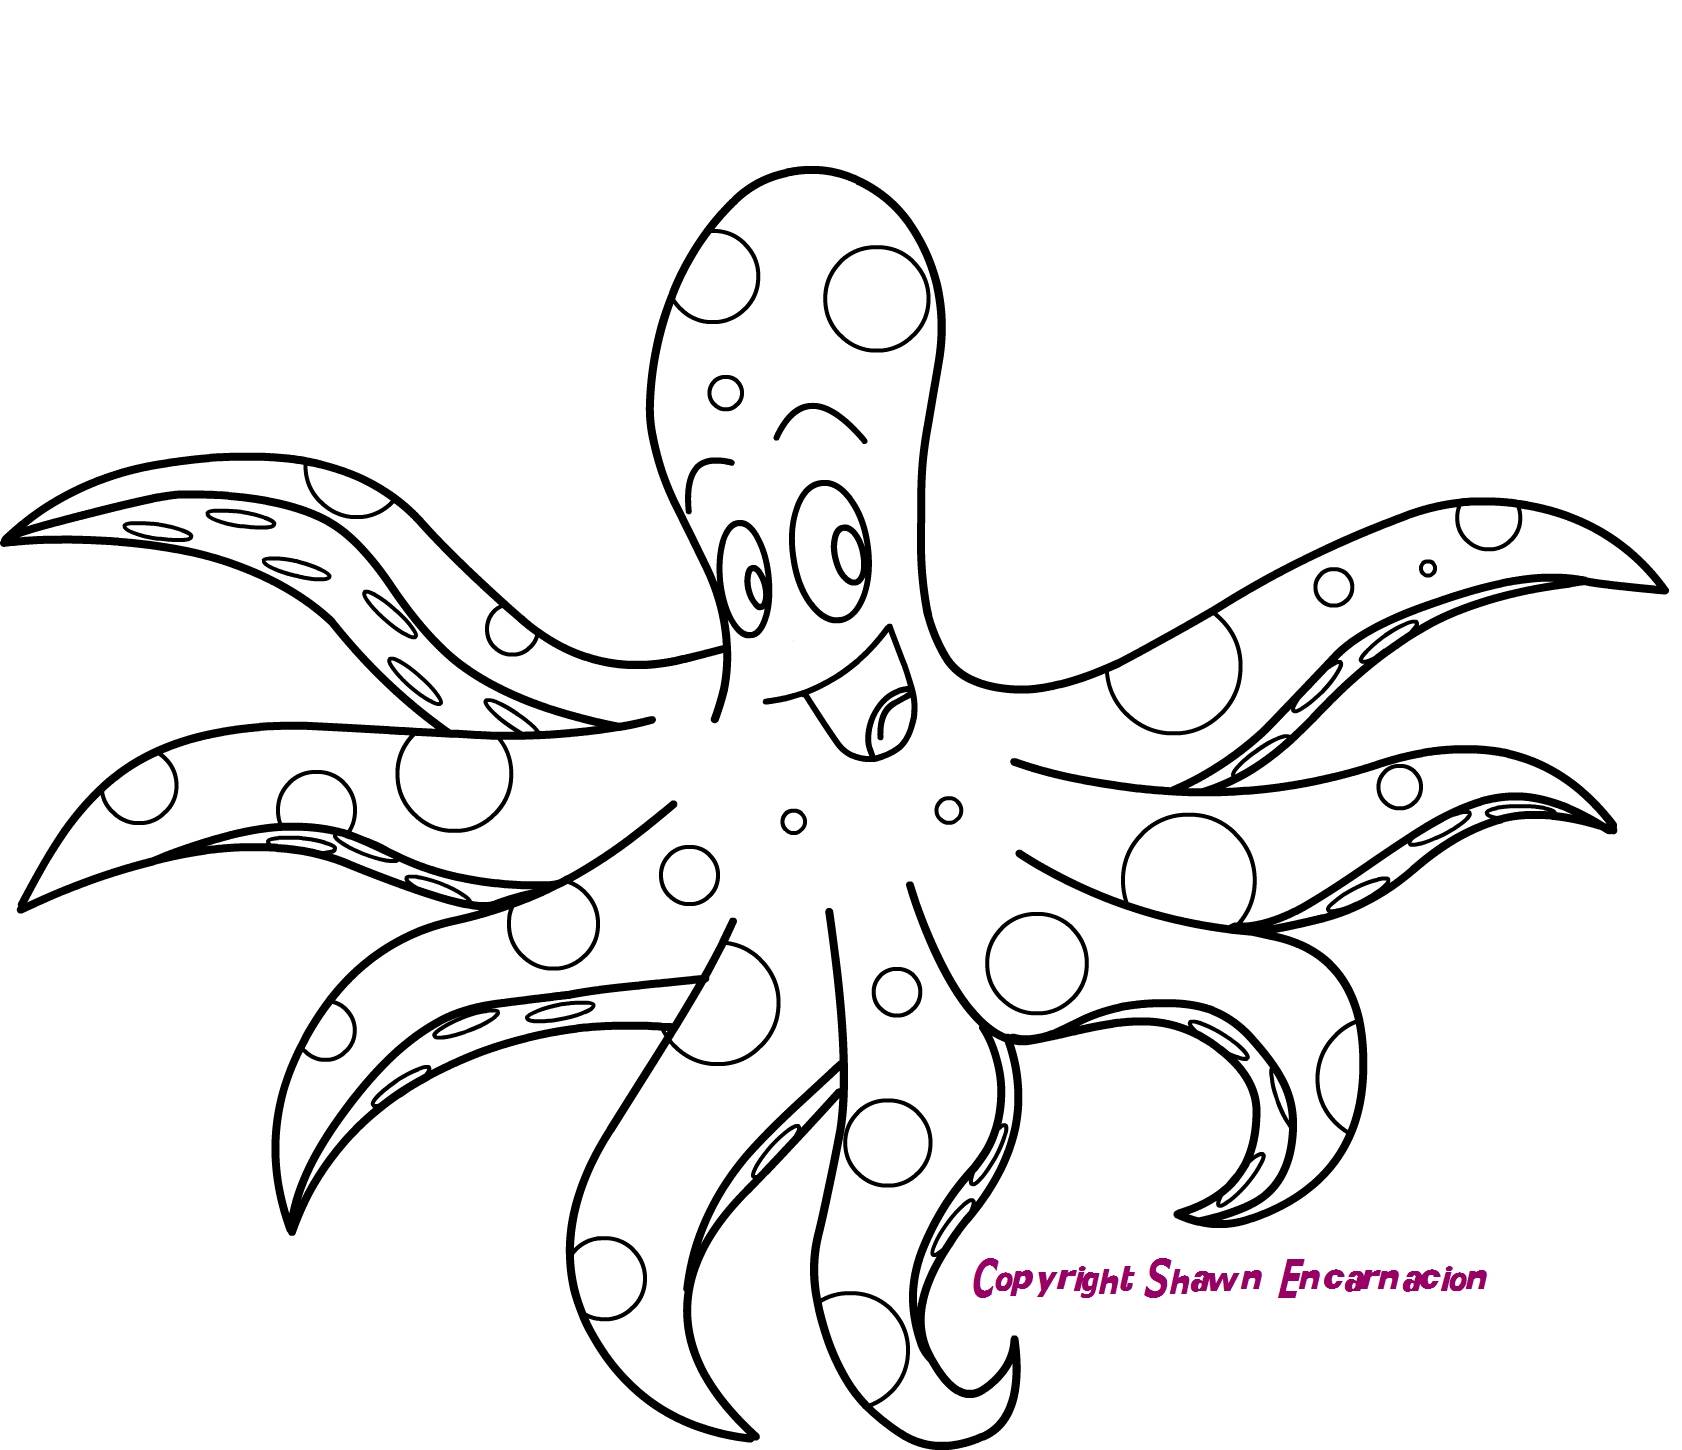 Squid Drawing For Kids - Gallery